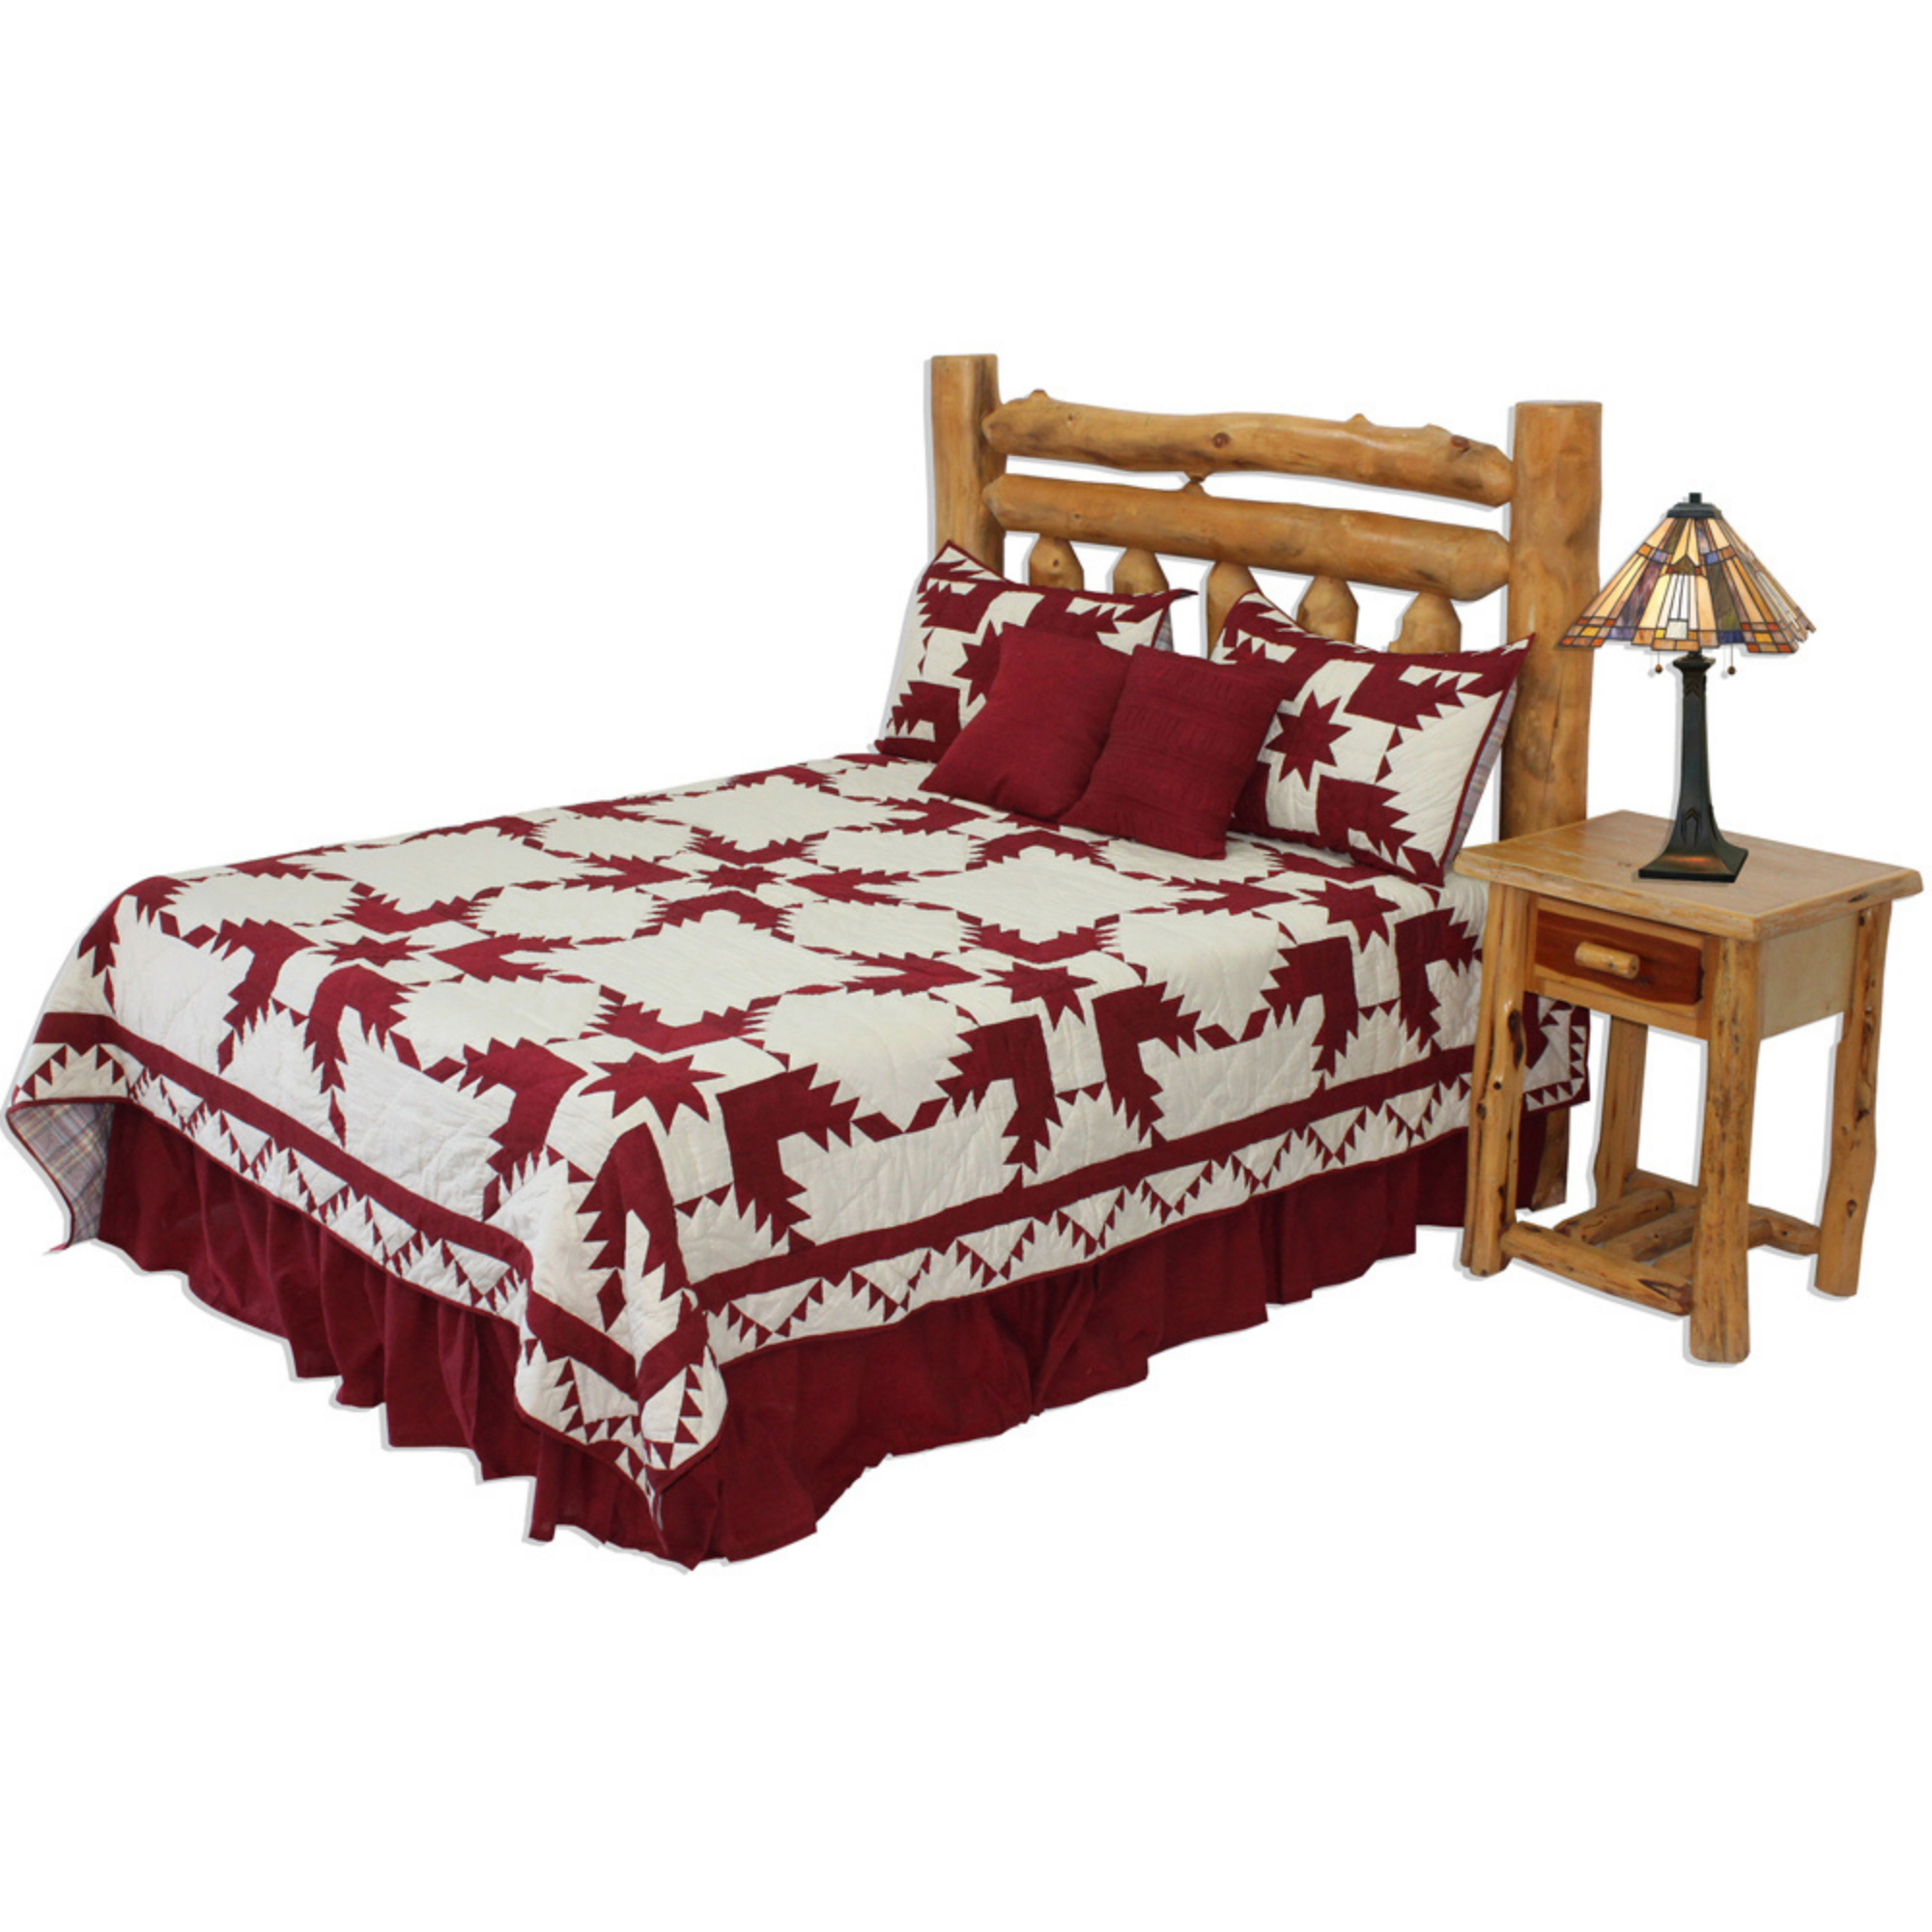 Red Feathered Star Queen Quilt 85"W x 95"L